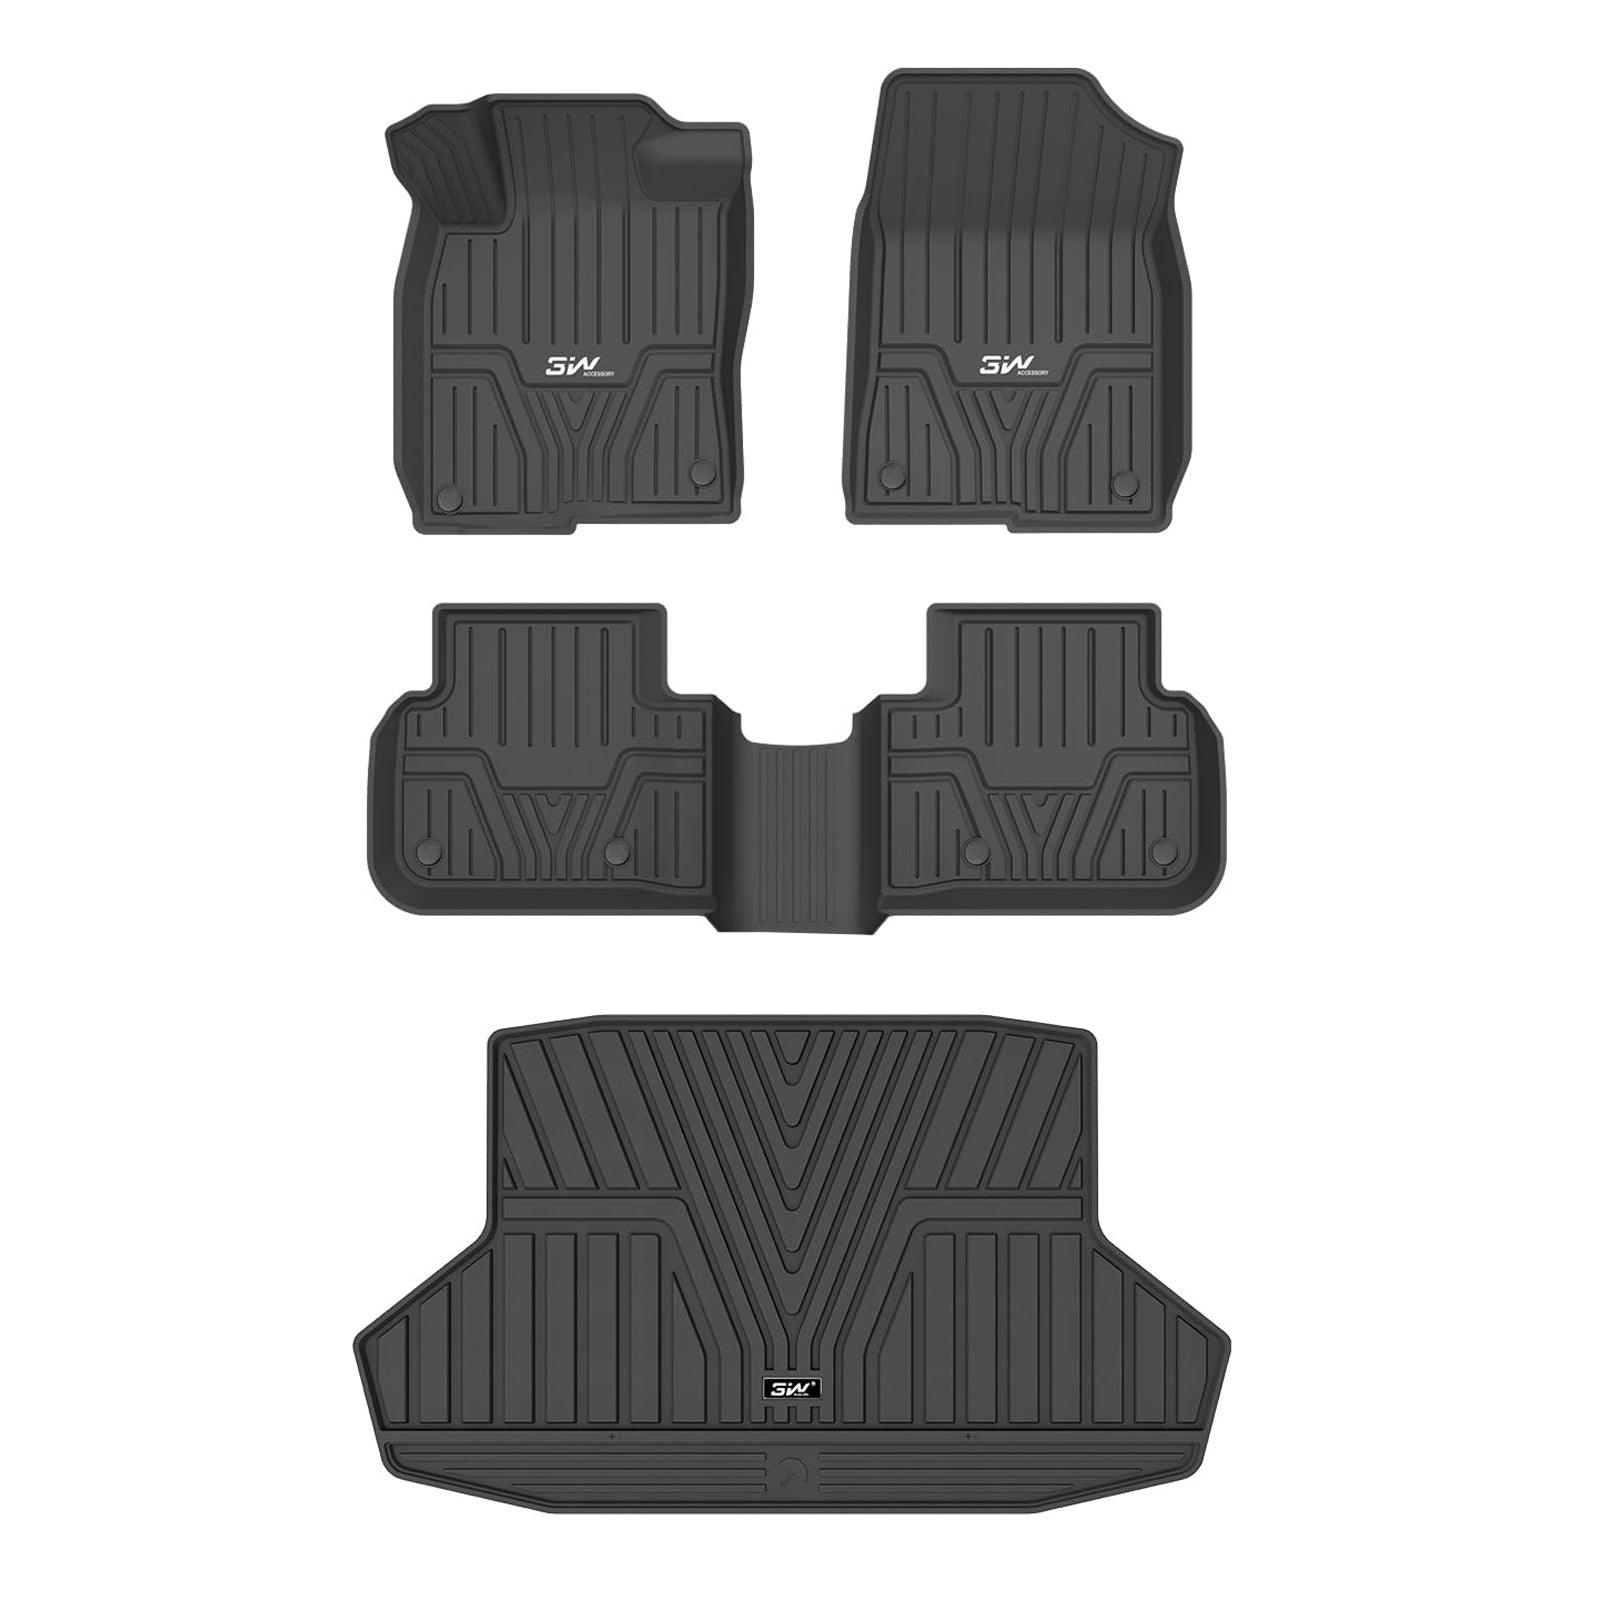 3W Honda Civic 2022-2024 (Non Hatchback) Custom Floor Mats Cargo Liner TPE Material & All-Weather Protection Vehicles & Parts 3W 2022-2024 Civic 2022-2024 1st&2nd Row+Trunk Mats